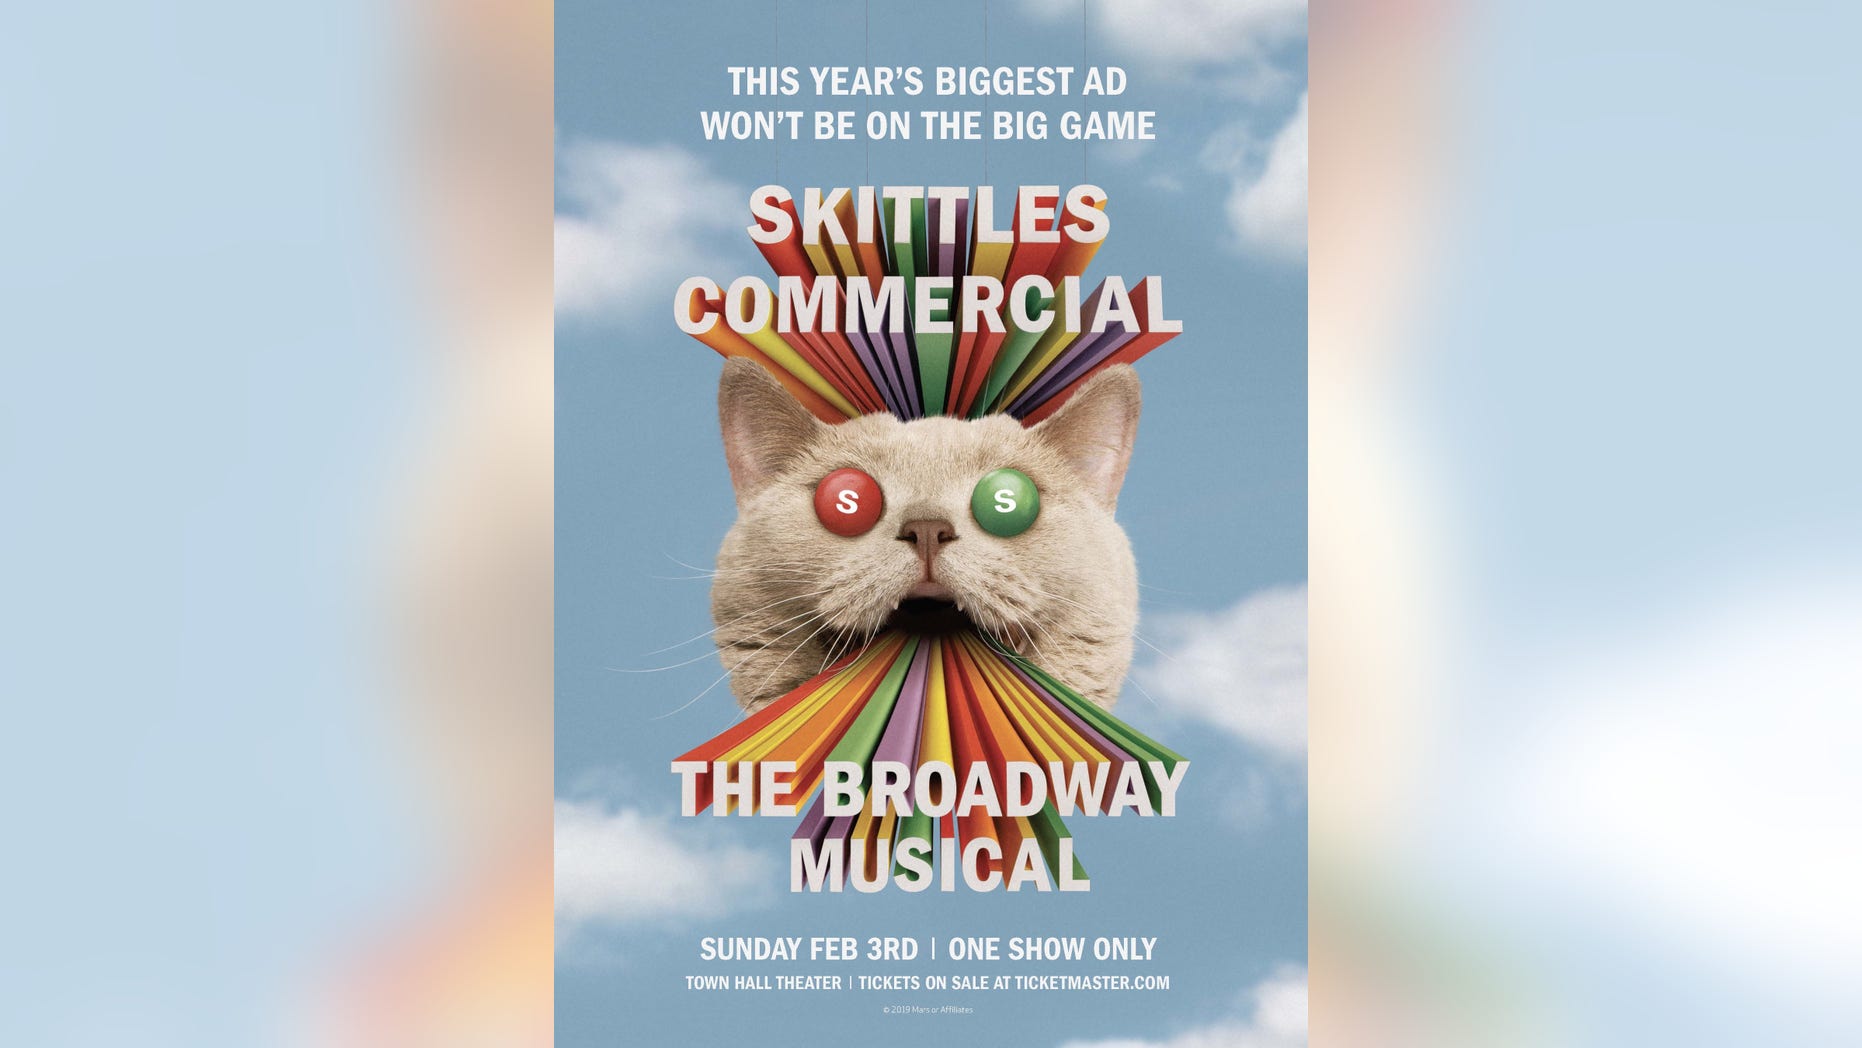 Skittles announces Super Bowl Sunday commercial will be a Broadway musical